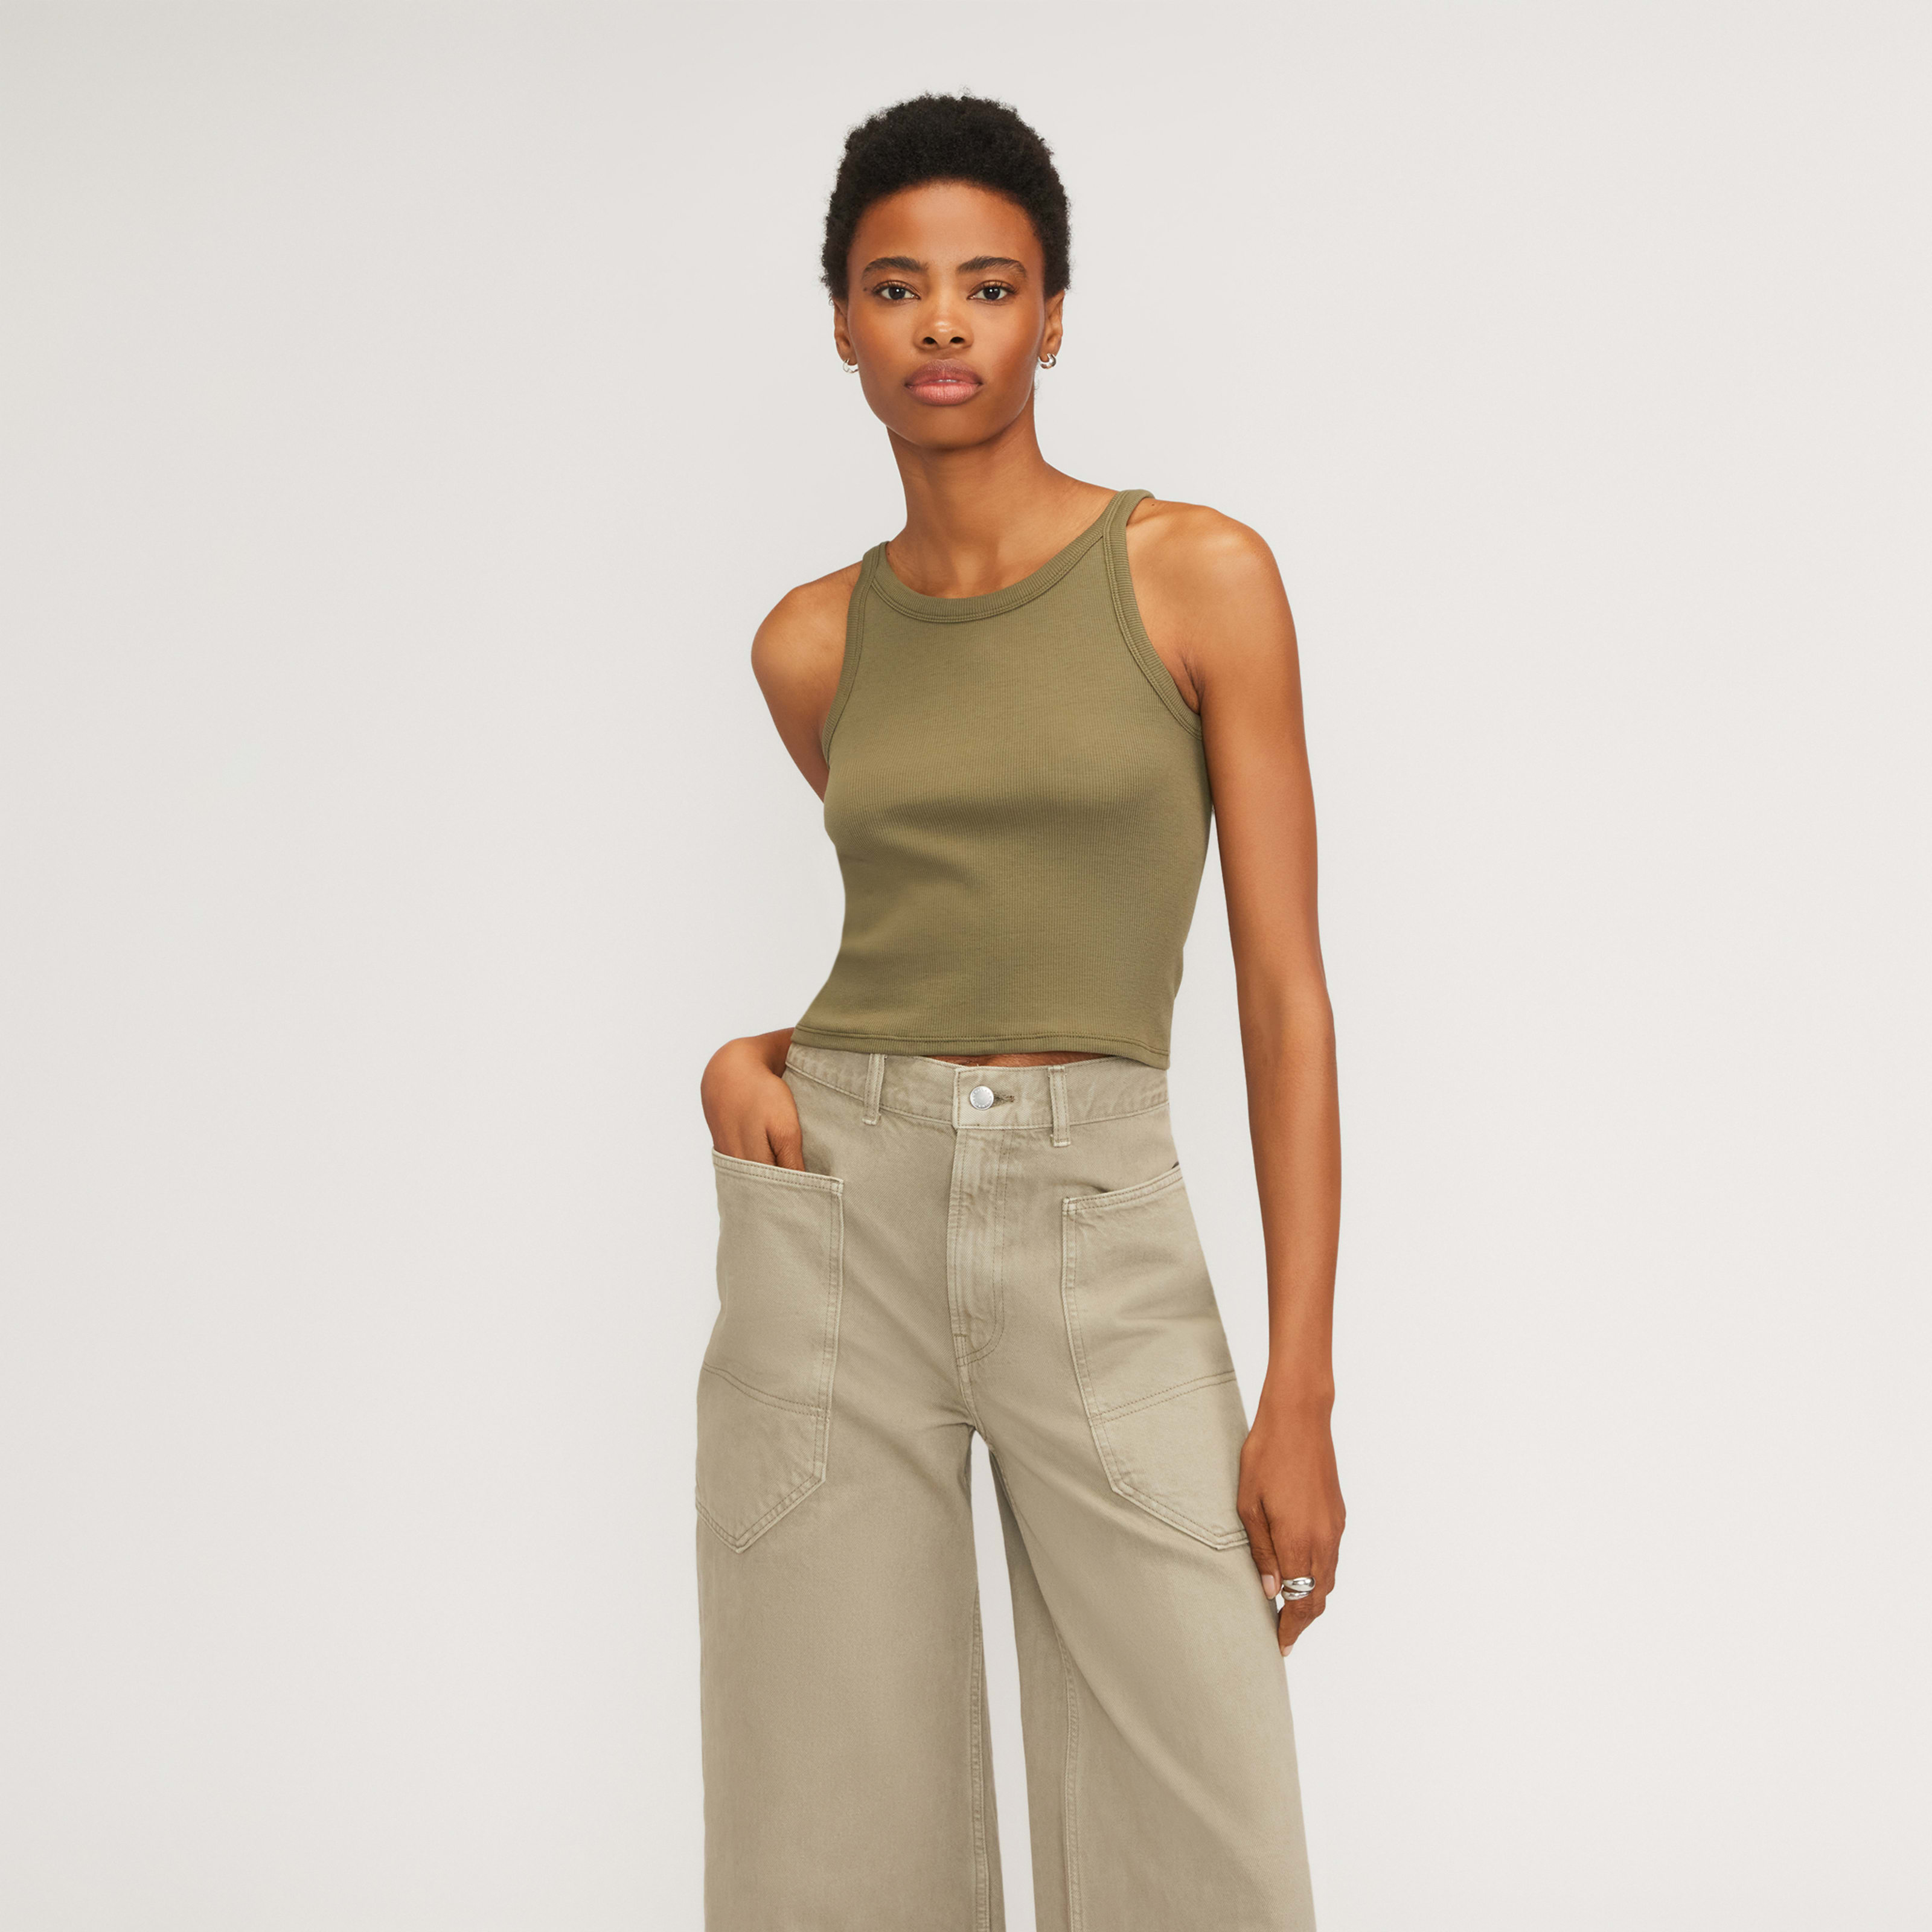 women's supimaâ® micro-rib cropped tank sweater by everlane in olive, size xxs